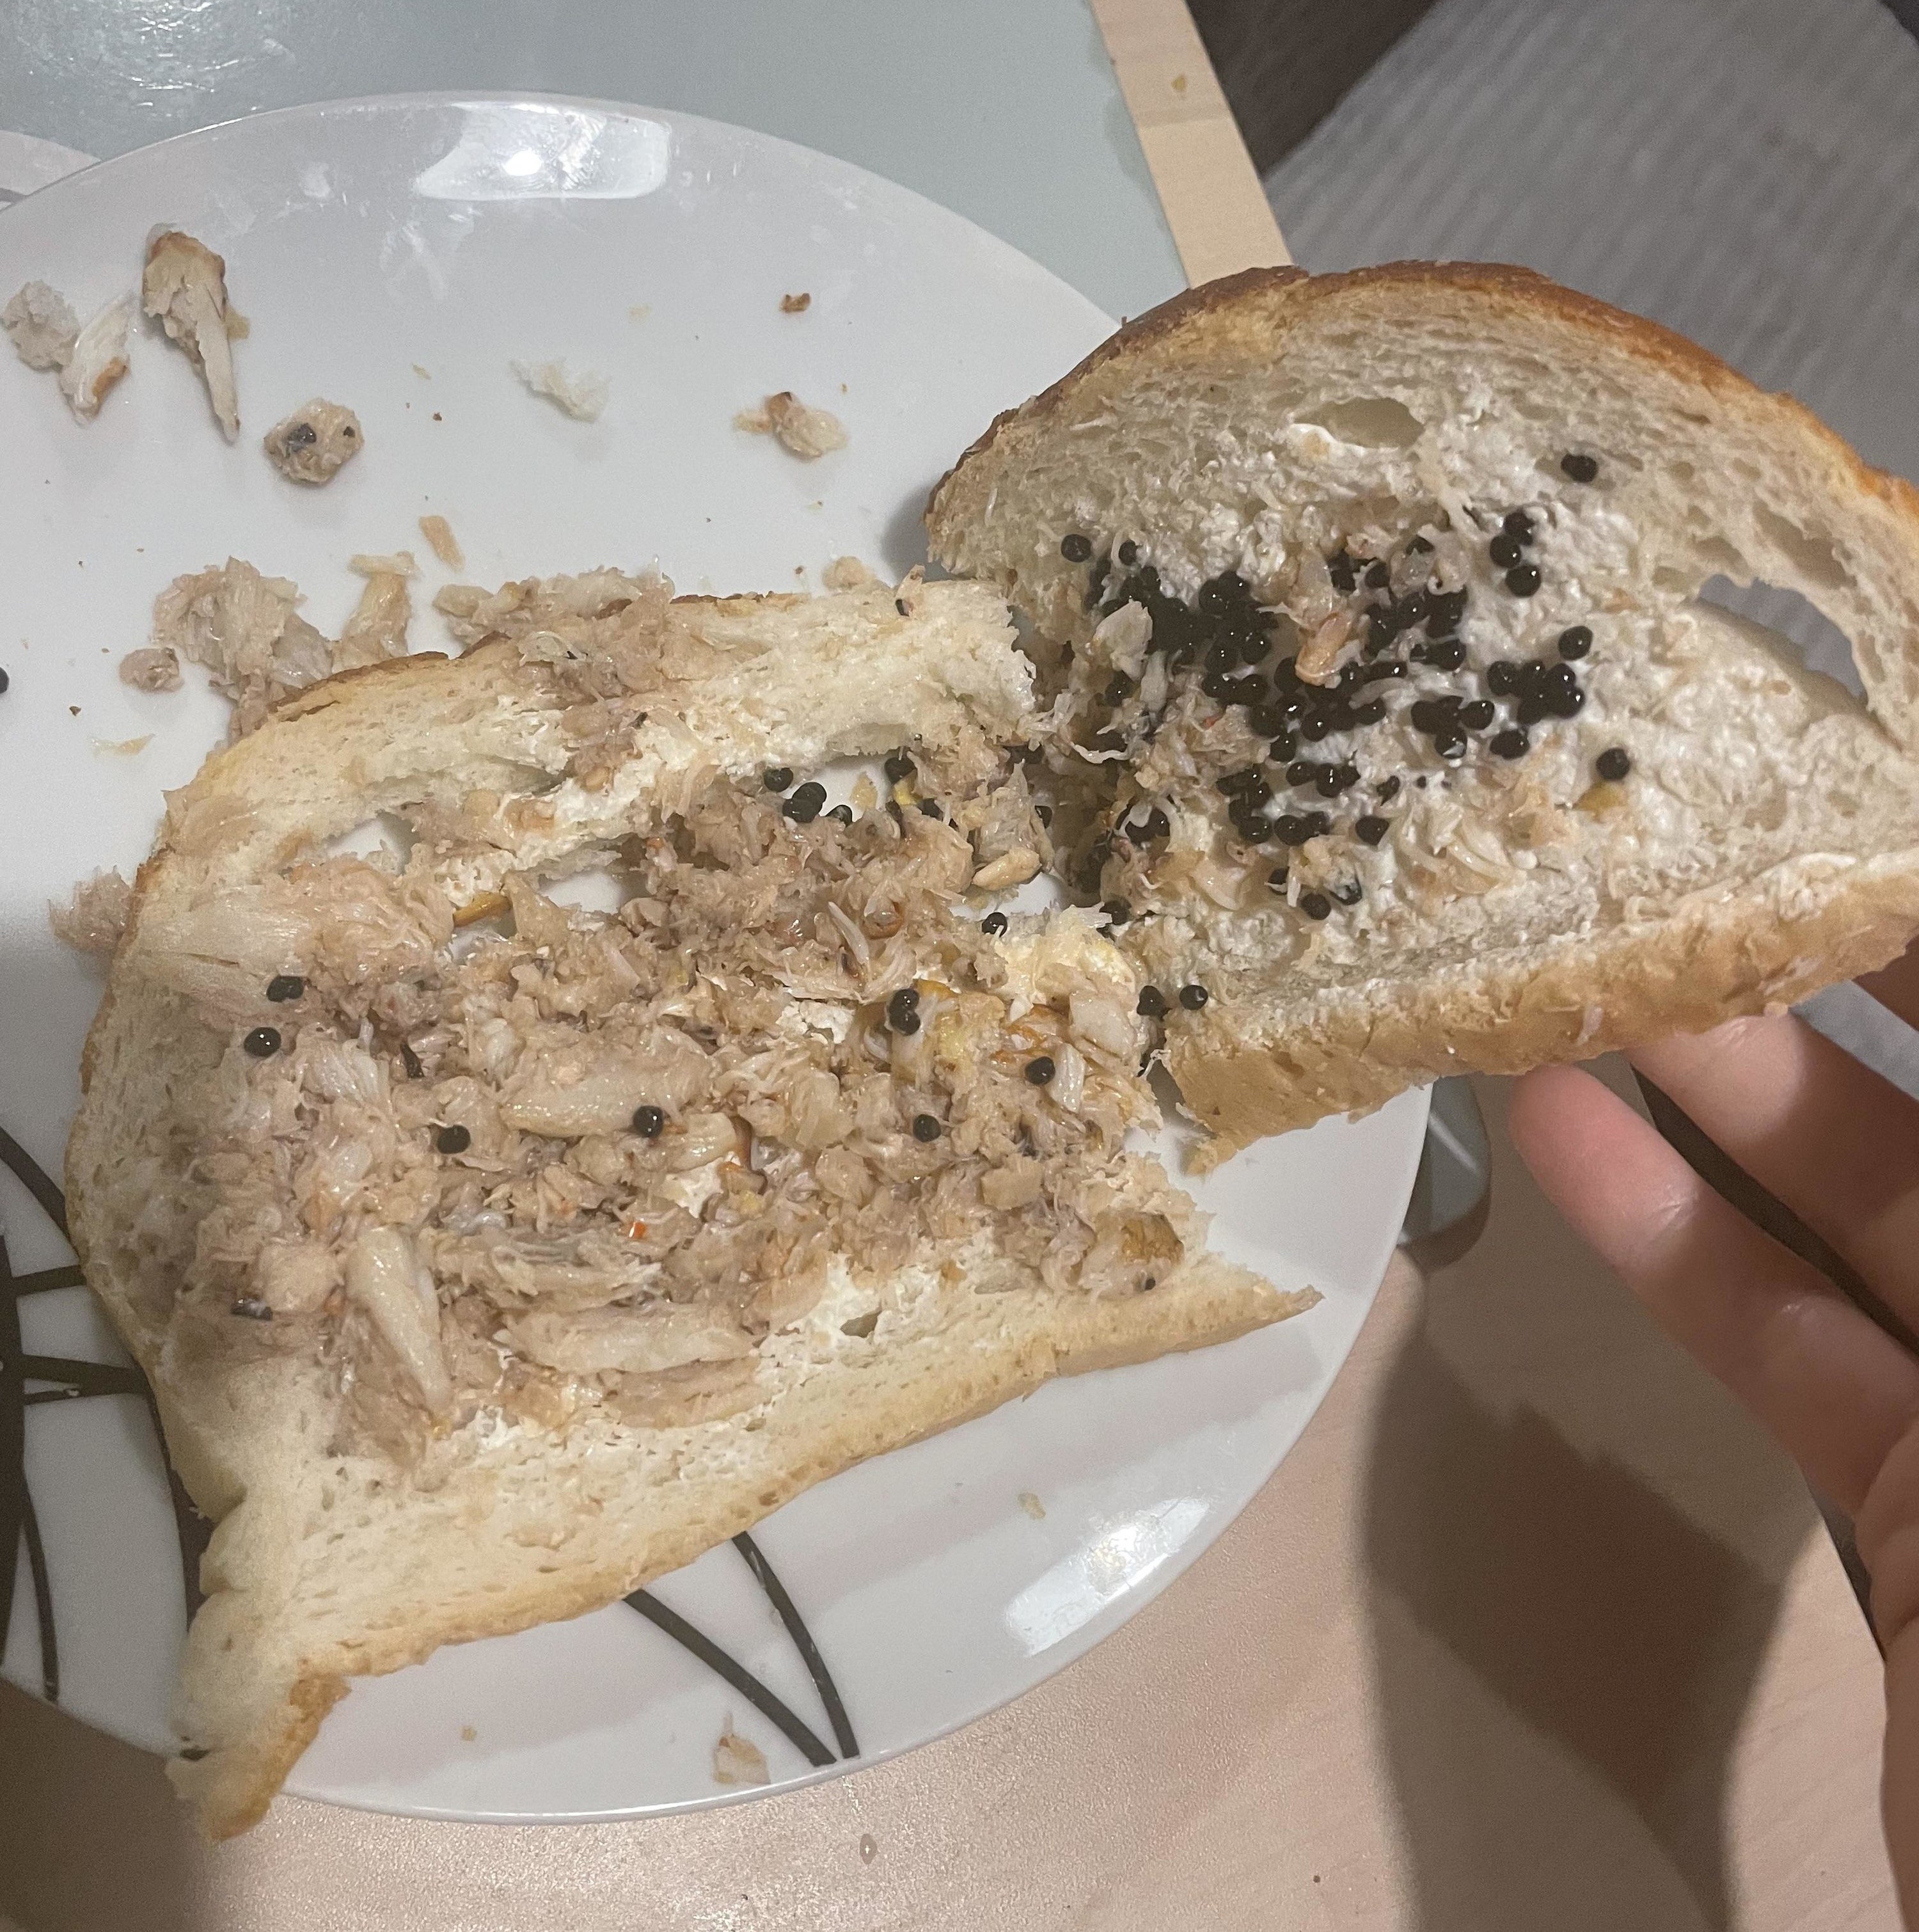 two slices of white bread with crab meat, caviar, and mayo in it